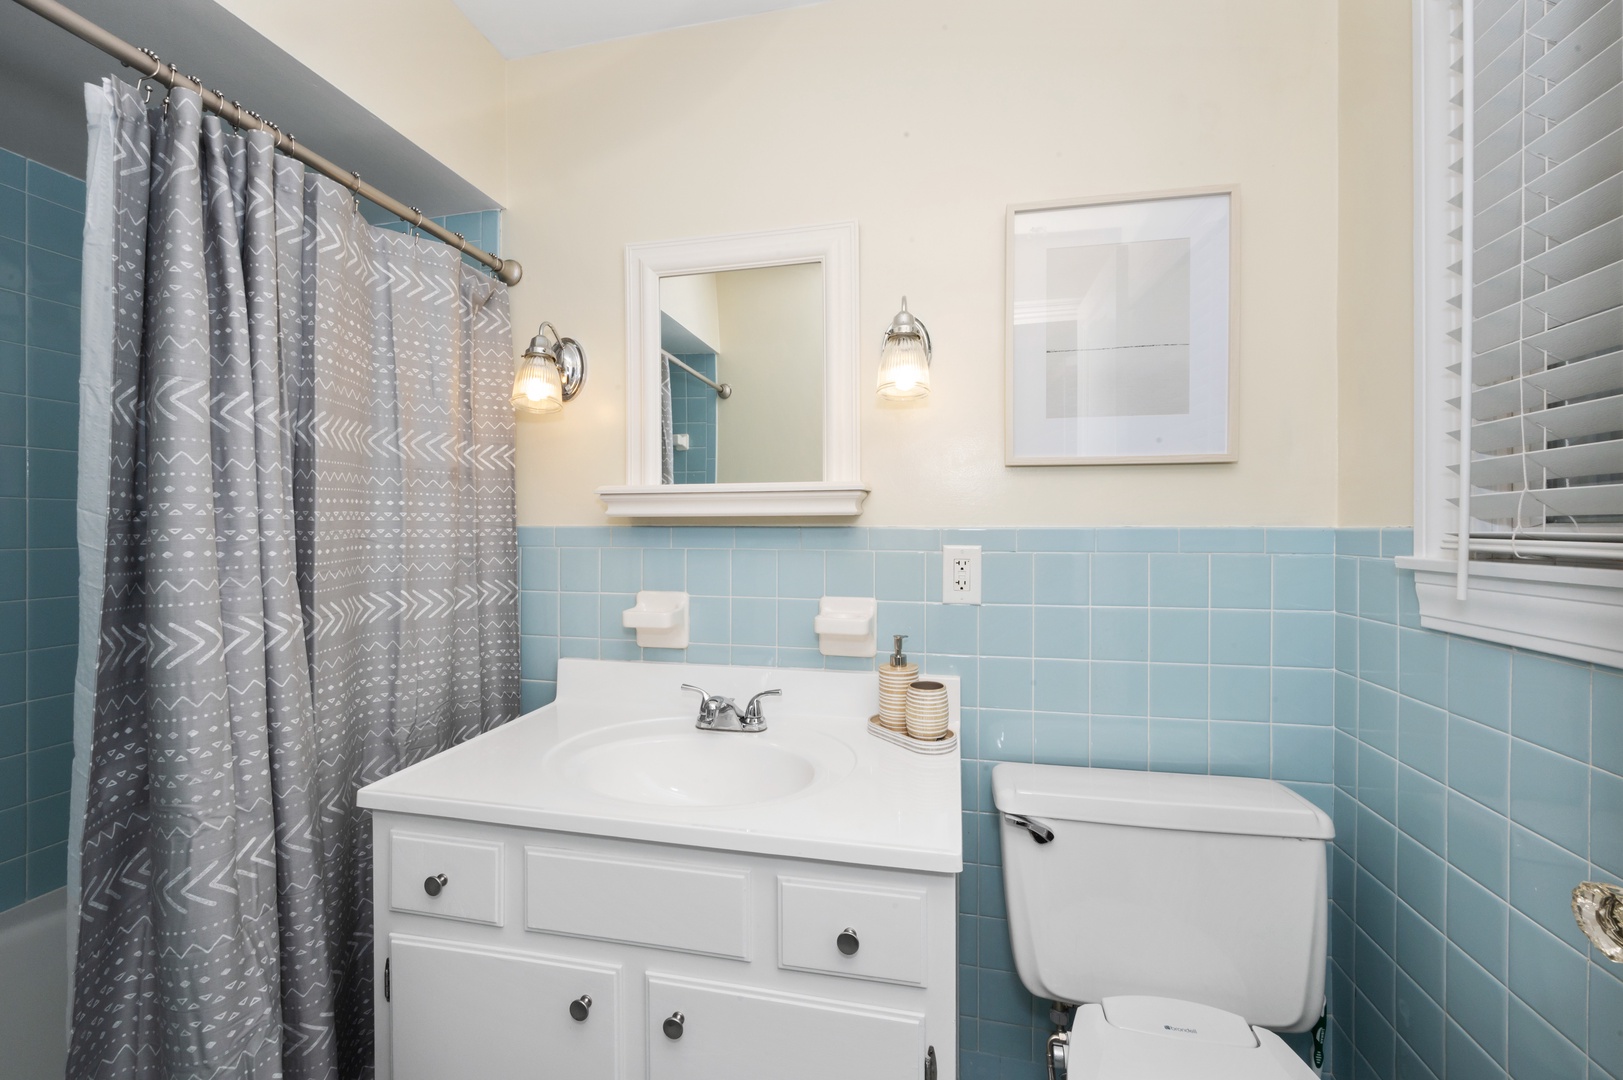 The 2nd floor full bathroom includes a single vanity & shower/tub combo